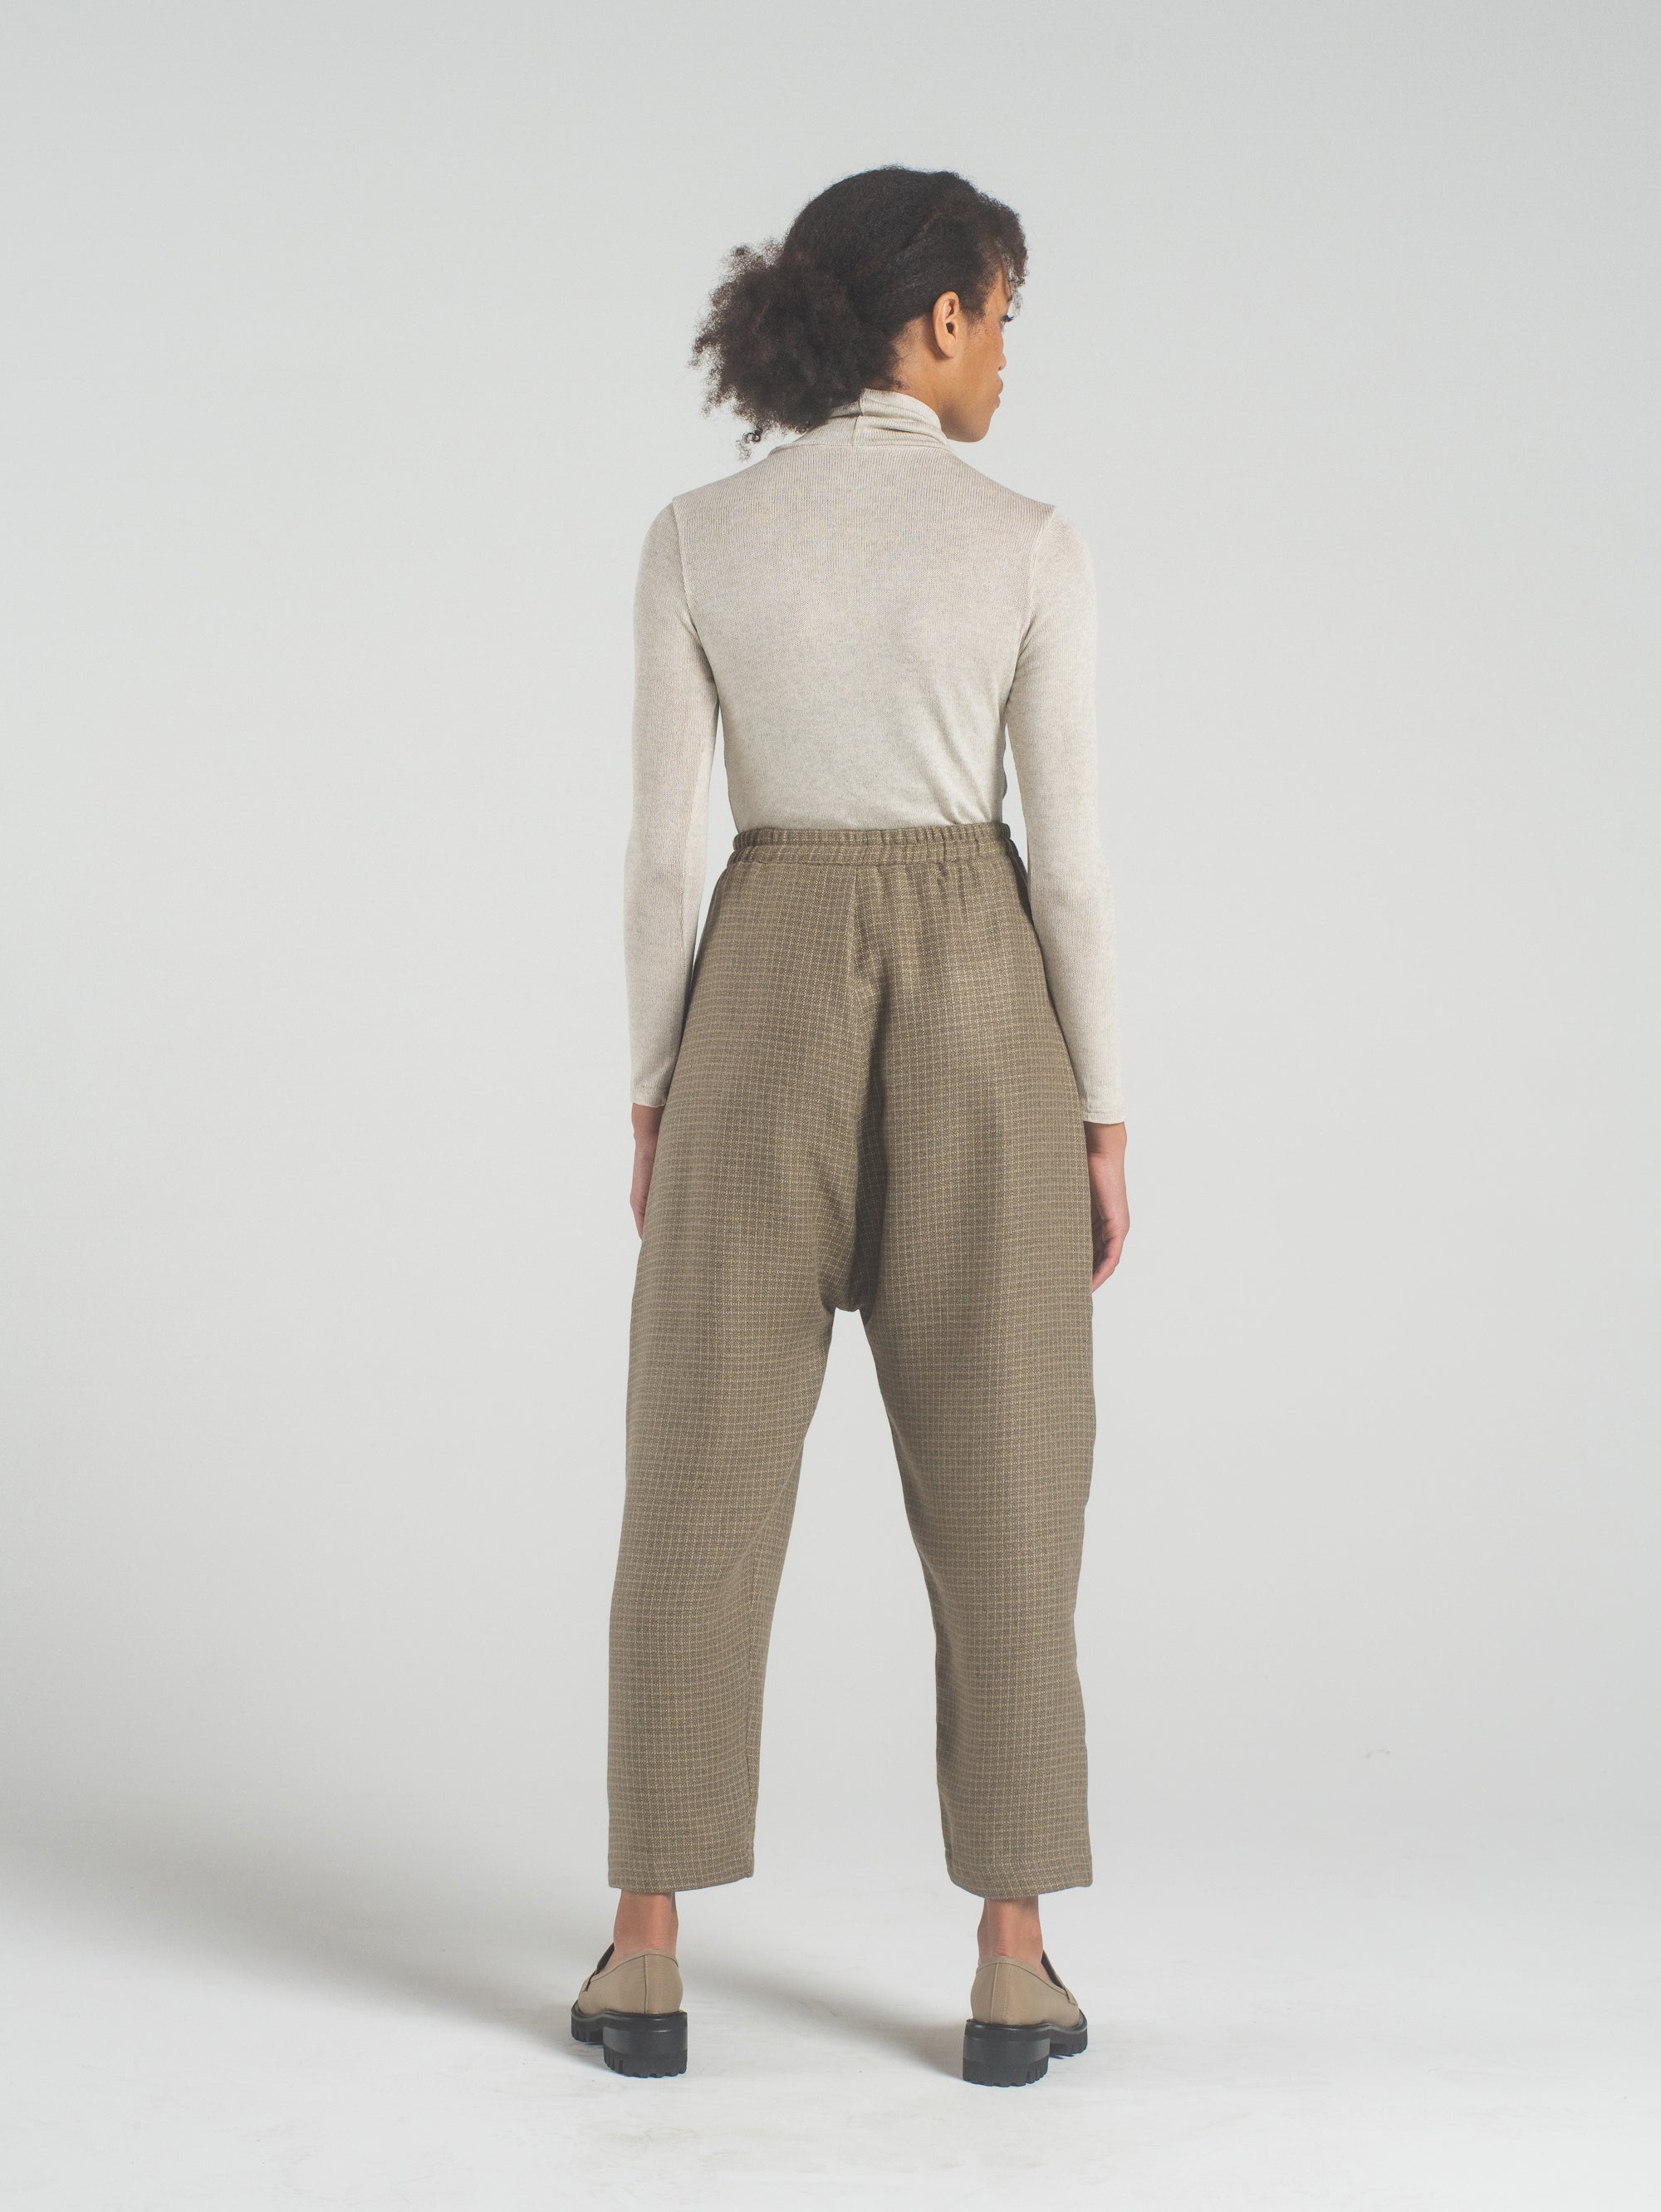 SAMPLE SALE - Nuria Pant in Camel Check - SMALL / STANDARD